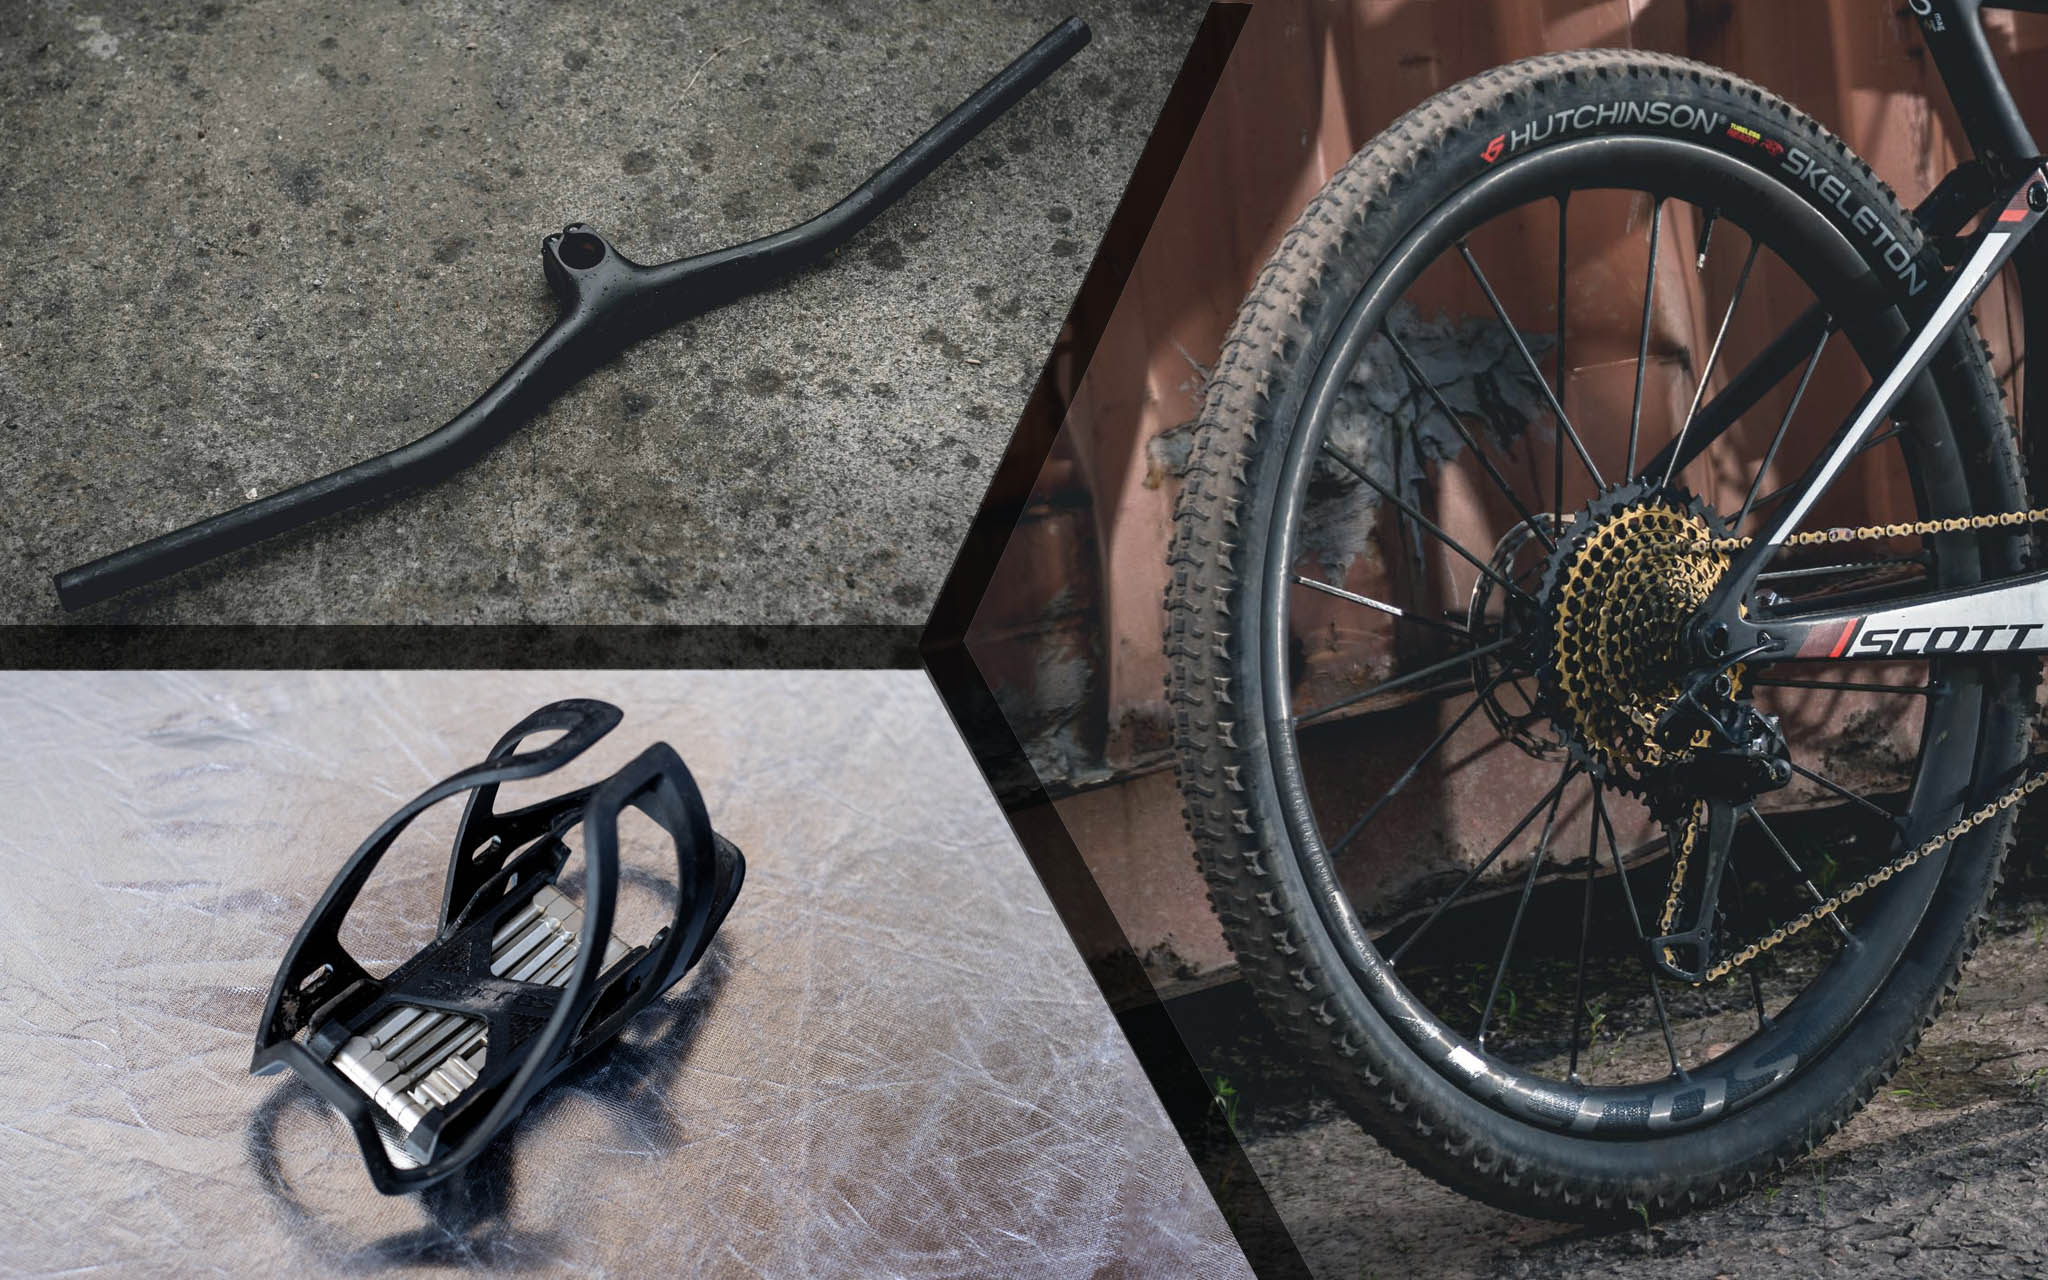 Test ride #15 – Syncros | Roues Silverton SL, cintre Fraser iC SL & Tailor IS Cage - Syncros Fraser IC SL